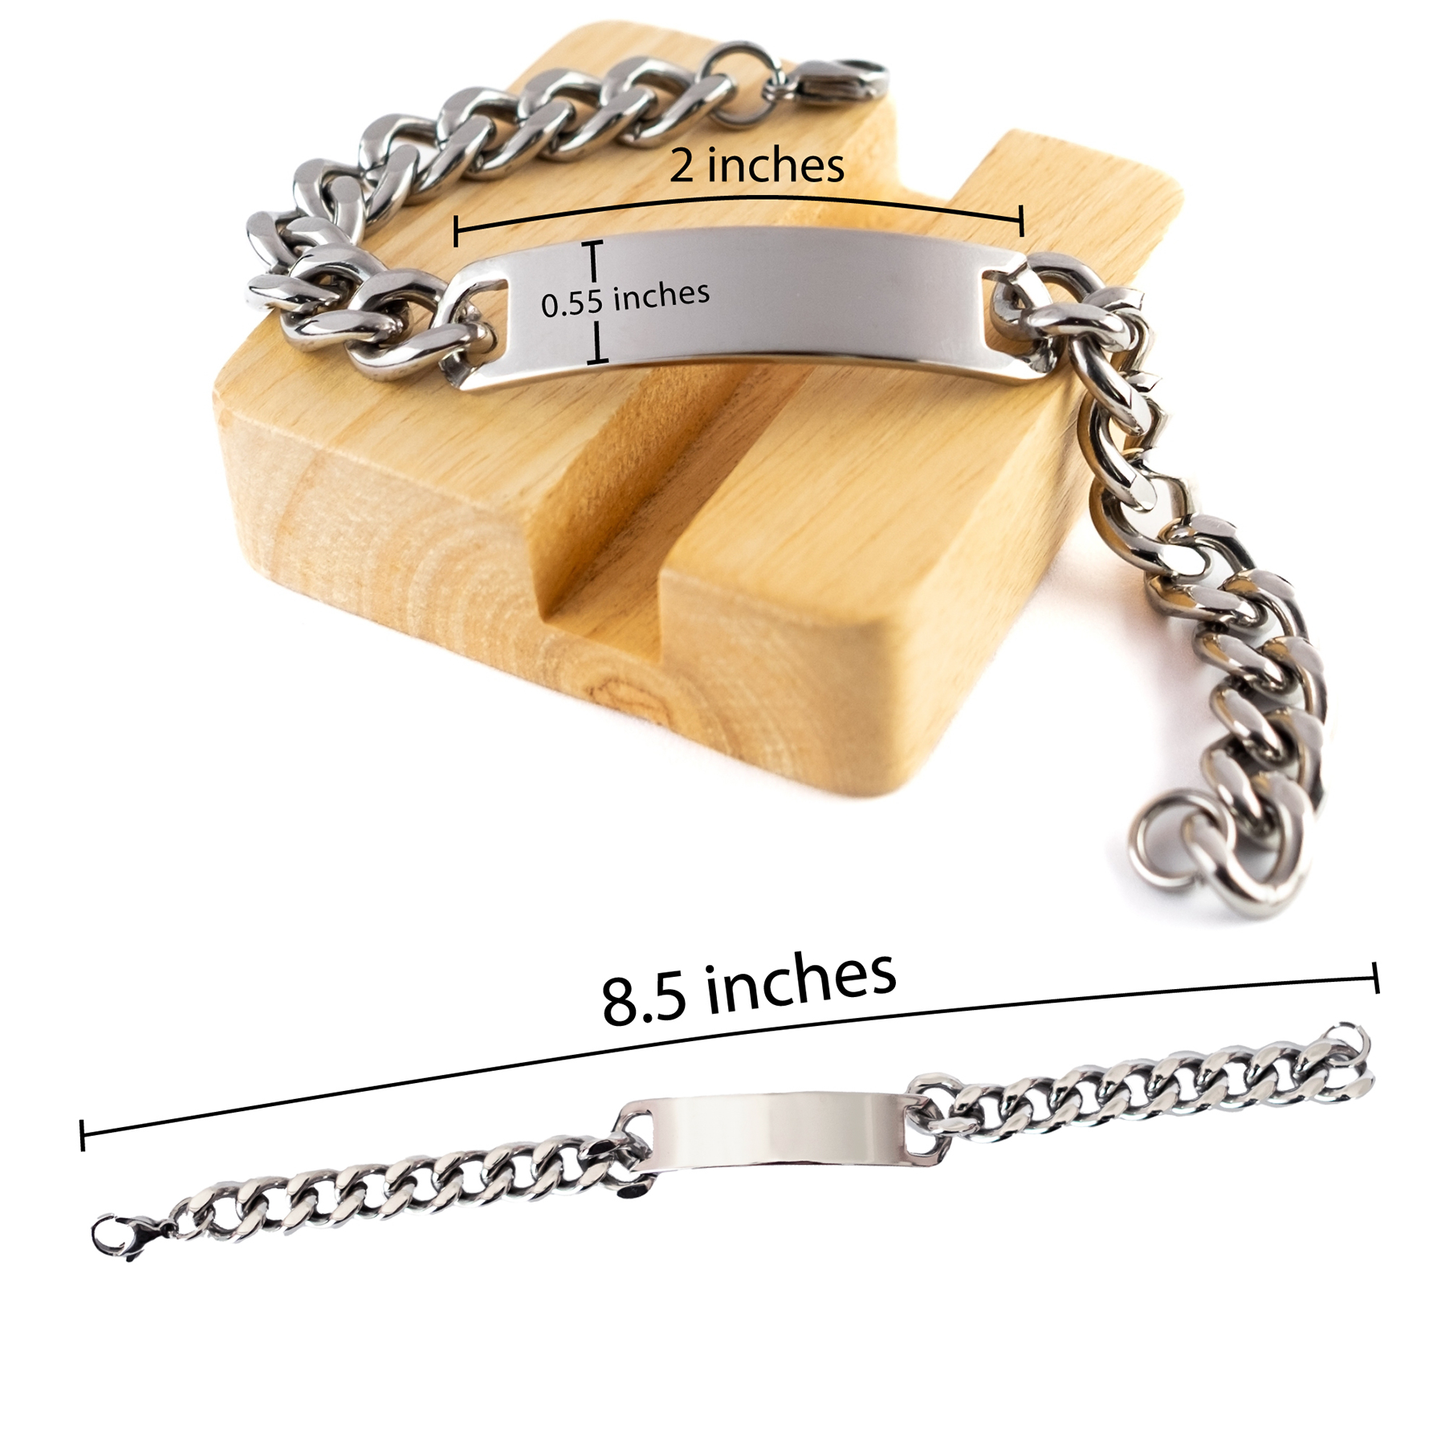 Stainless Steel Cuban Chain Bracelet for Abuela - Always in my Heart Engraved Gift for Grandma on Mothers Day, Birthday, Christmas - Unique Jewelry for Women - Inspirational and Timeless Piece